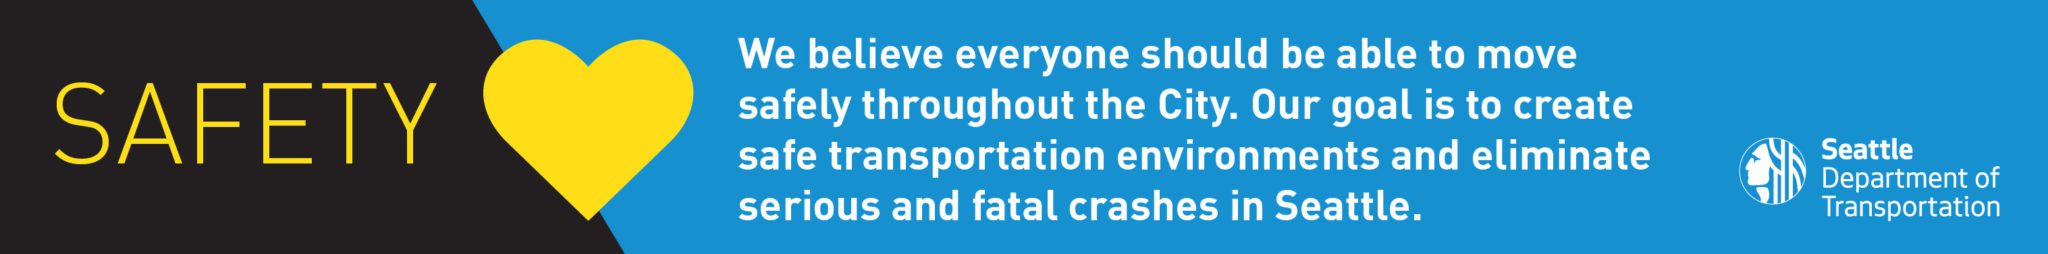 Graphic icon showcasing safety, one of SDOT's core values and goals.